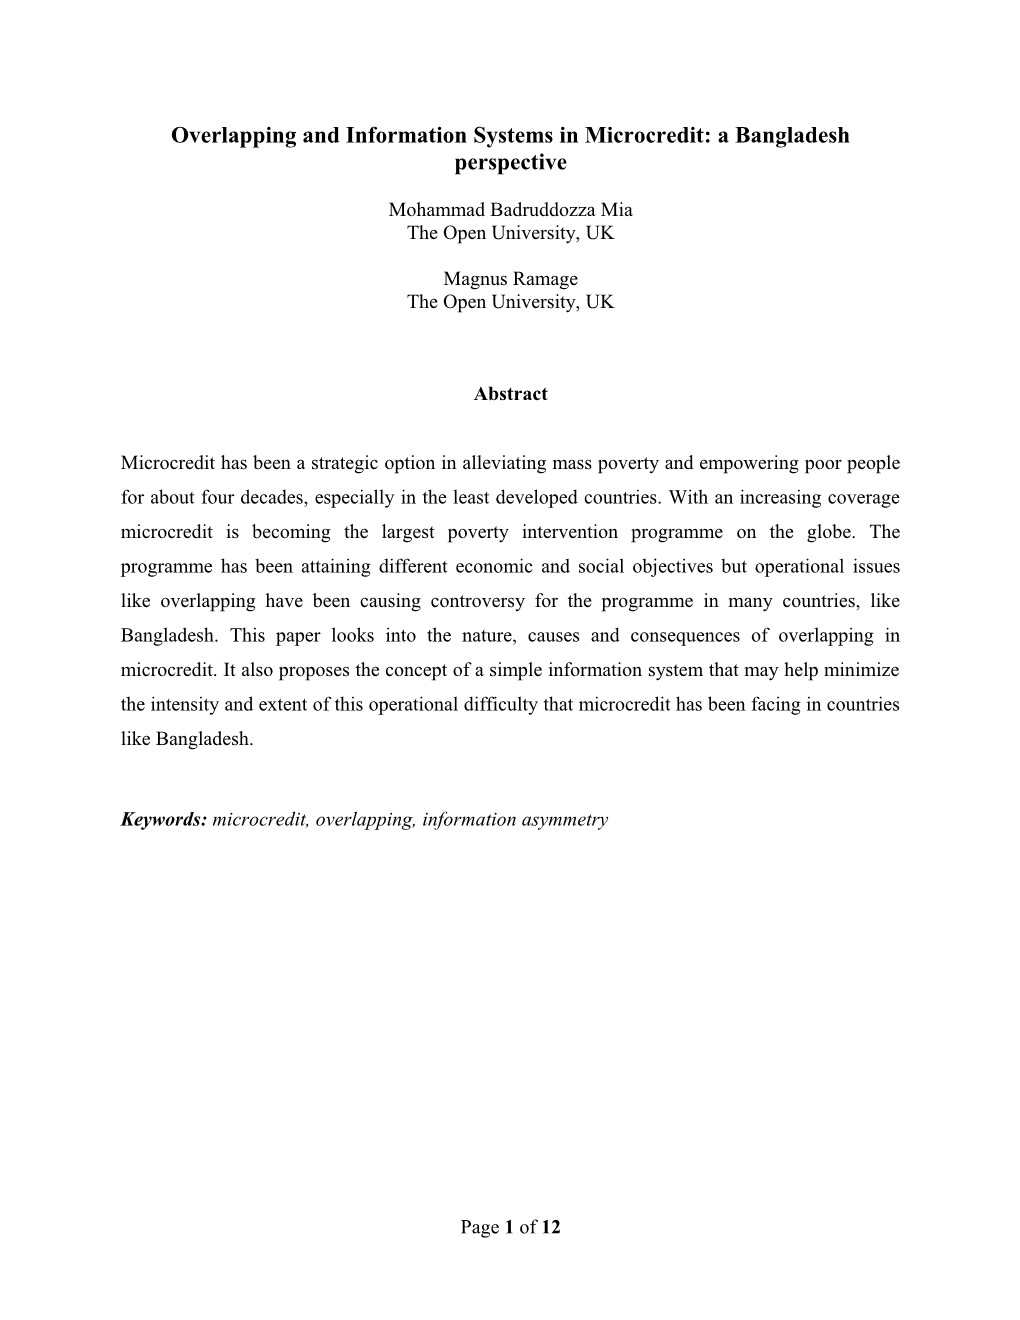 Overlapping and Information Systems in Microcredit: a Bangladesh Perspective